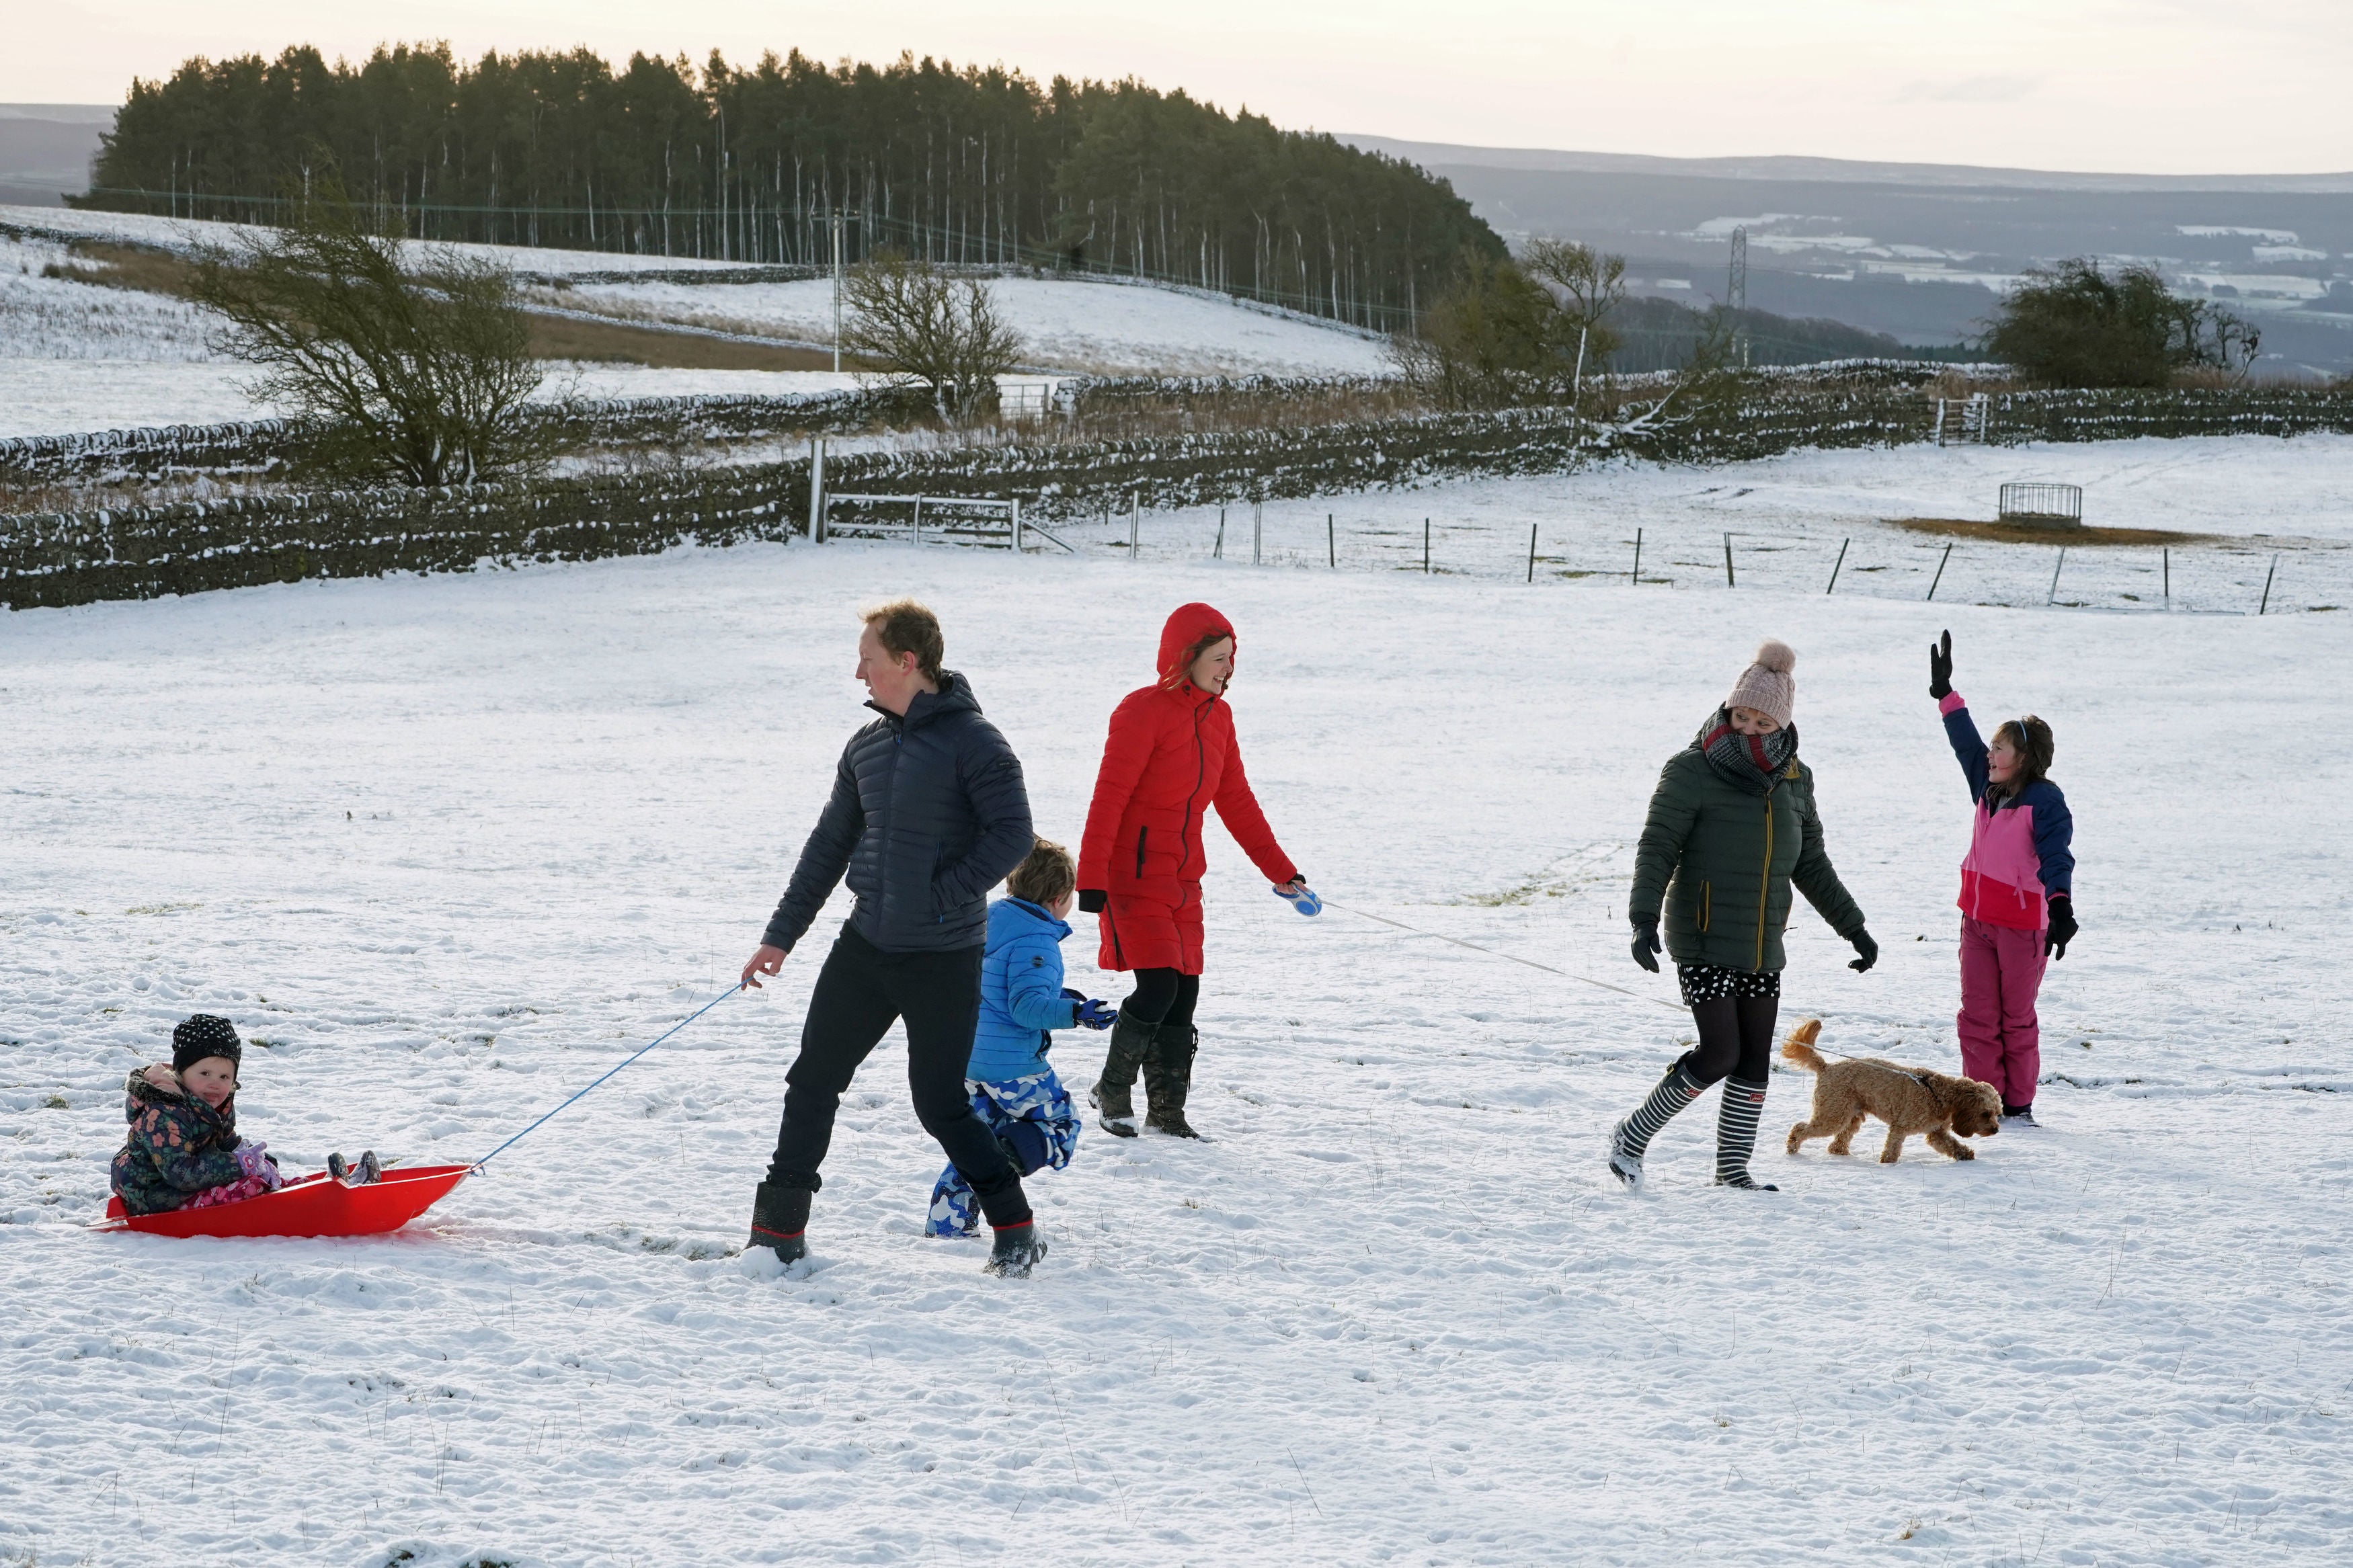 The UK last experienced a widespread white Christmas in 2010.